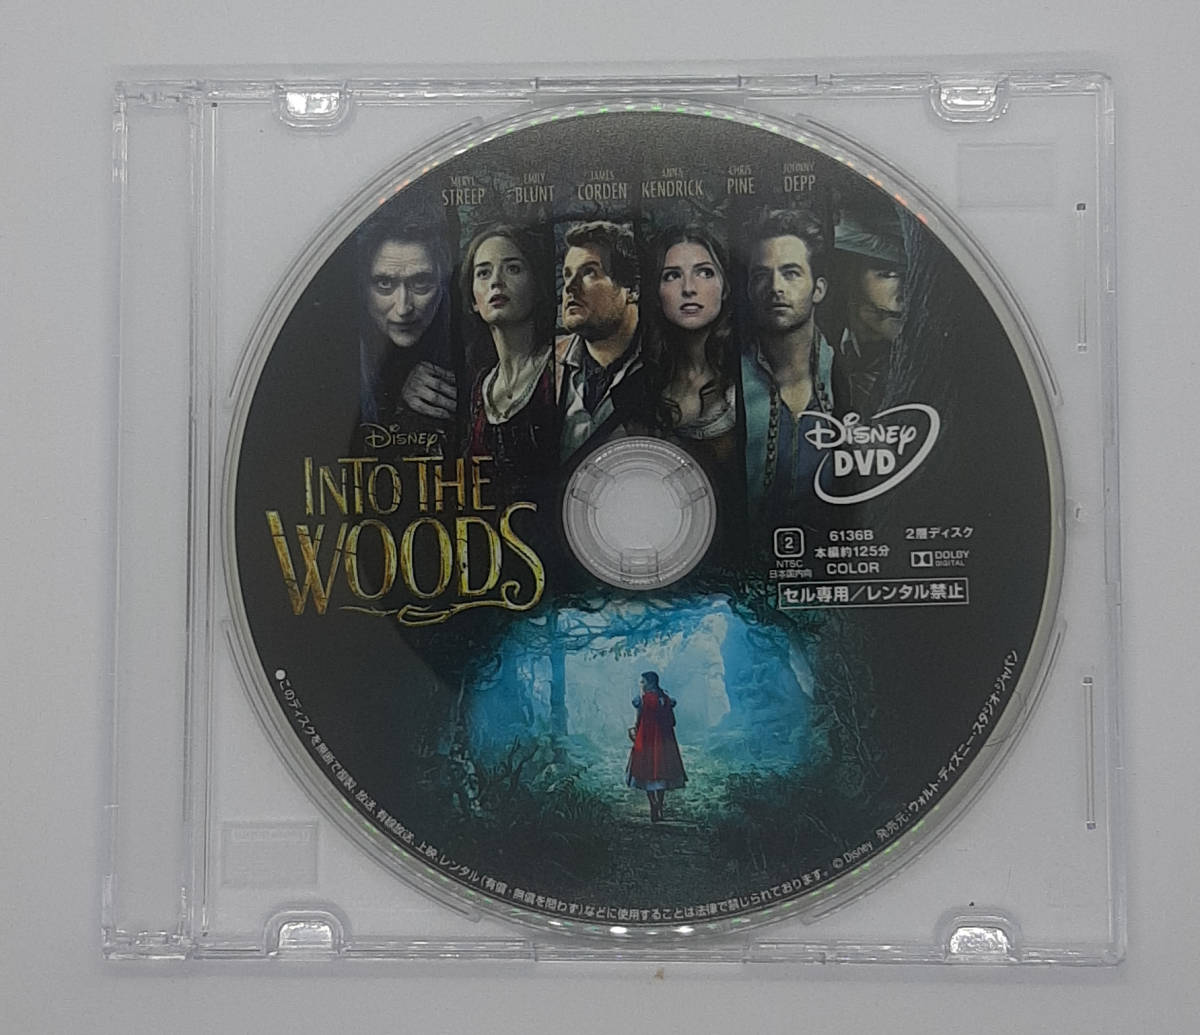  prompt decision new goods not yet reproduction * in tu* The * Woods DVD only *movienex domestic regular goods Disney movie 